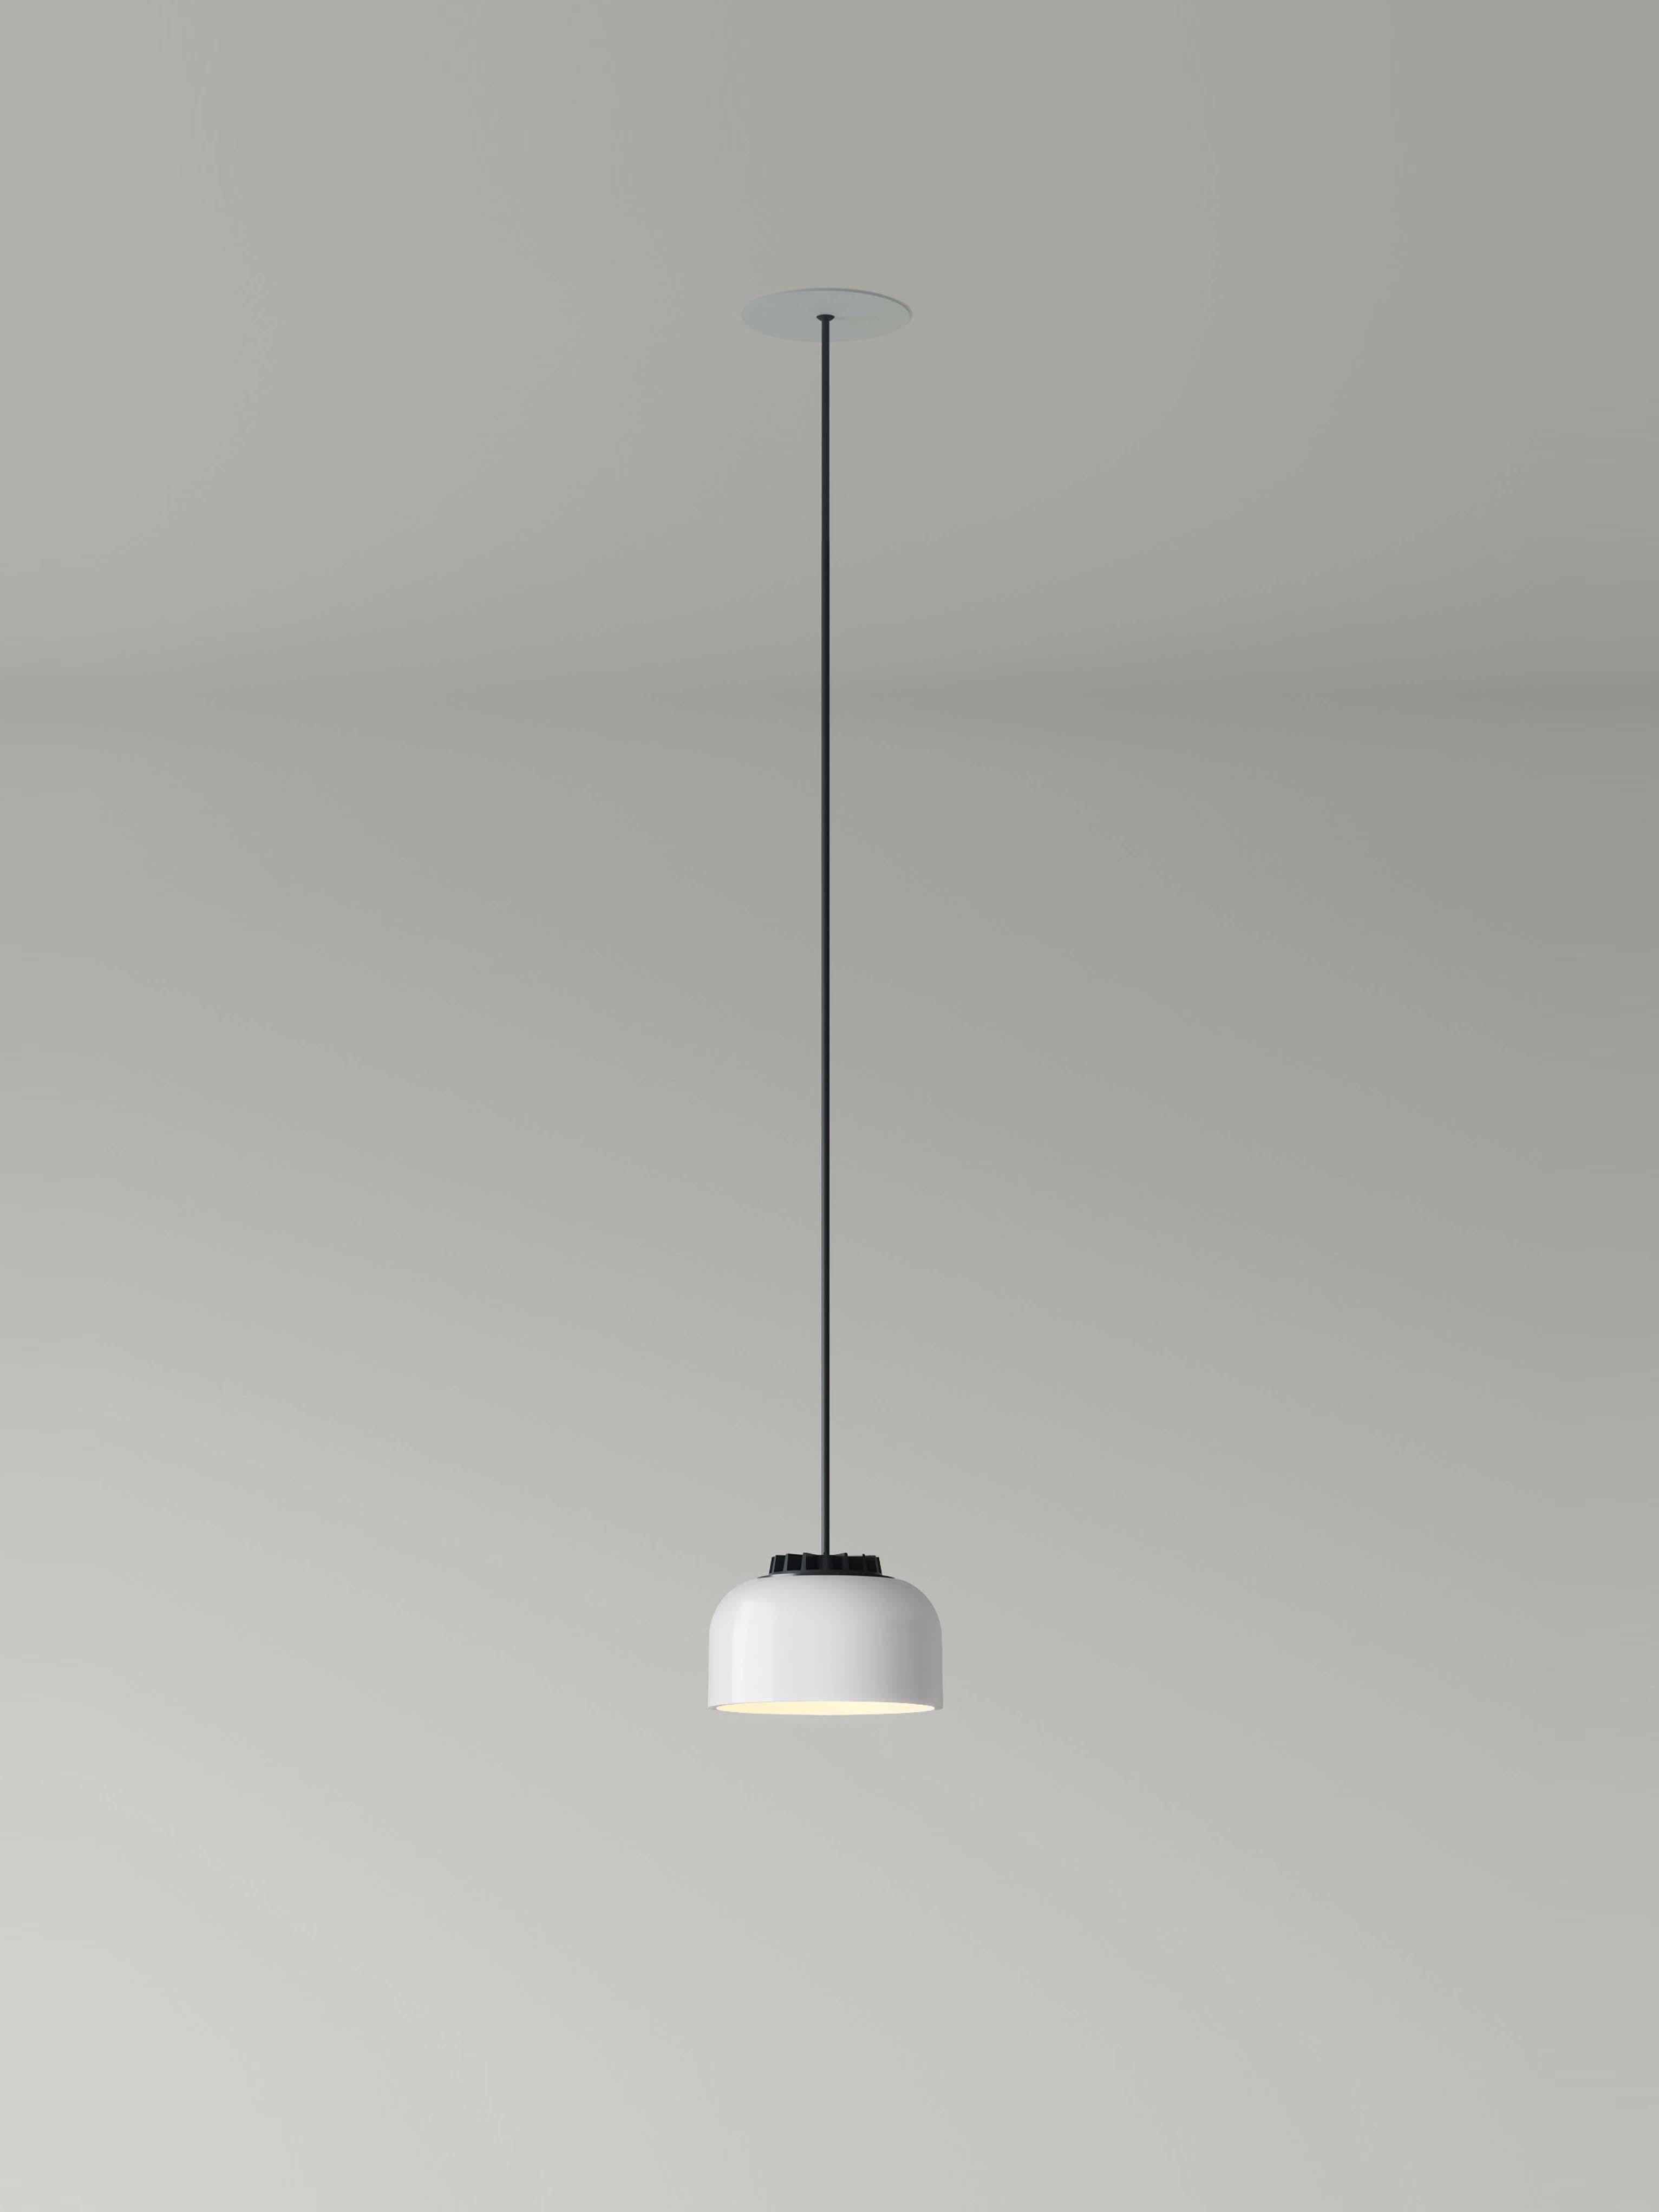 Small White HeadHat Bowl Pendant Lamp by Santa & Cole
Dimensions: D 14 x H 9 cm
Materials: Metal, ceramic.
Cable lenght: 3mts.
Available in white or black ceramic. Available in 2 cable lengths: 3mts, 8mts.
Availalble in 2 canopy colors: black or